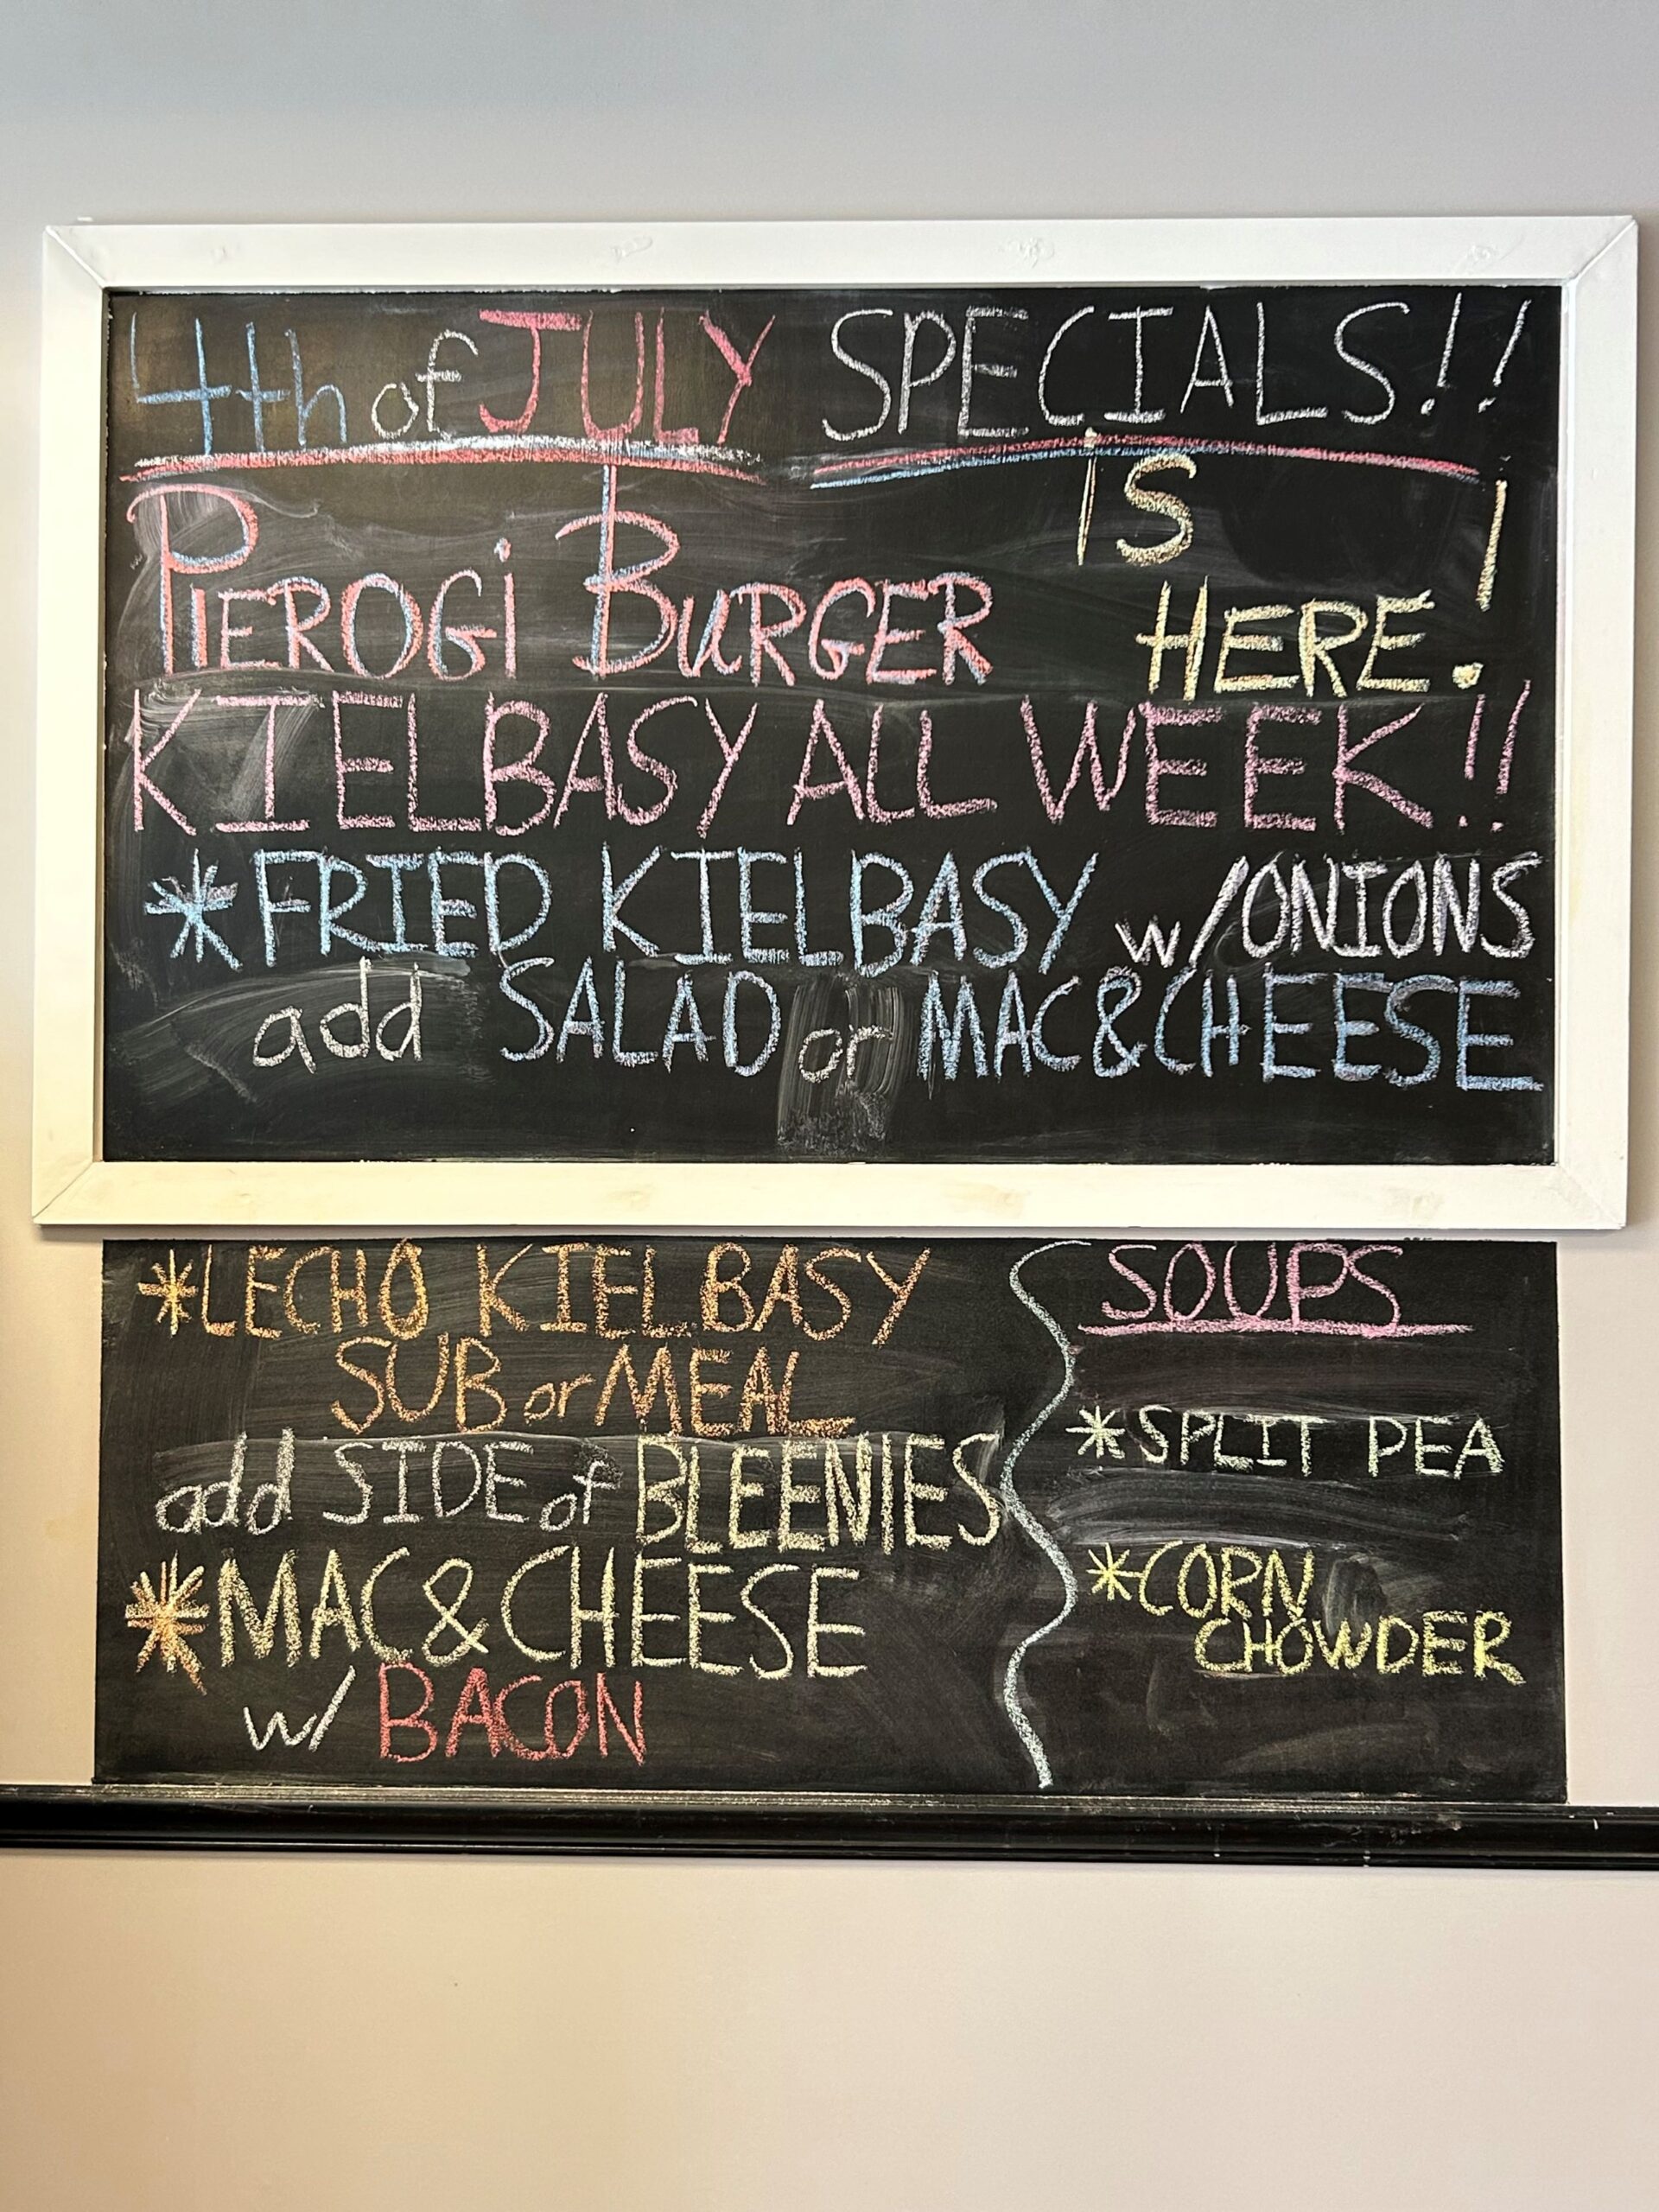 Check the Chalkboard for the 1st weekend of July 2024 including 4th of July Specials at Kat's Cafe in Minersville listing Pierogi Burger, Kielbasy all week, mac and cheese, bleenies, and more.